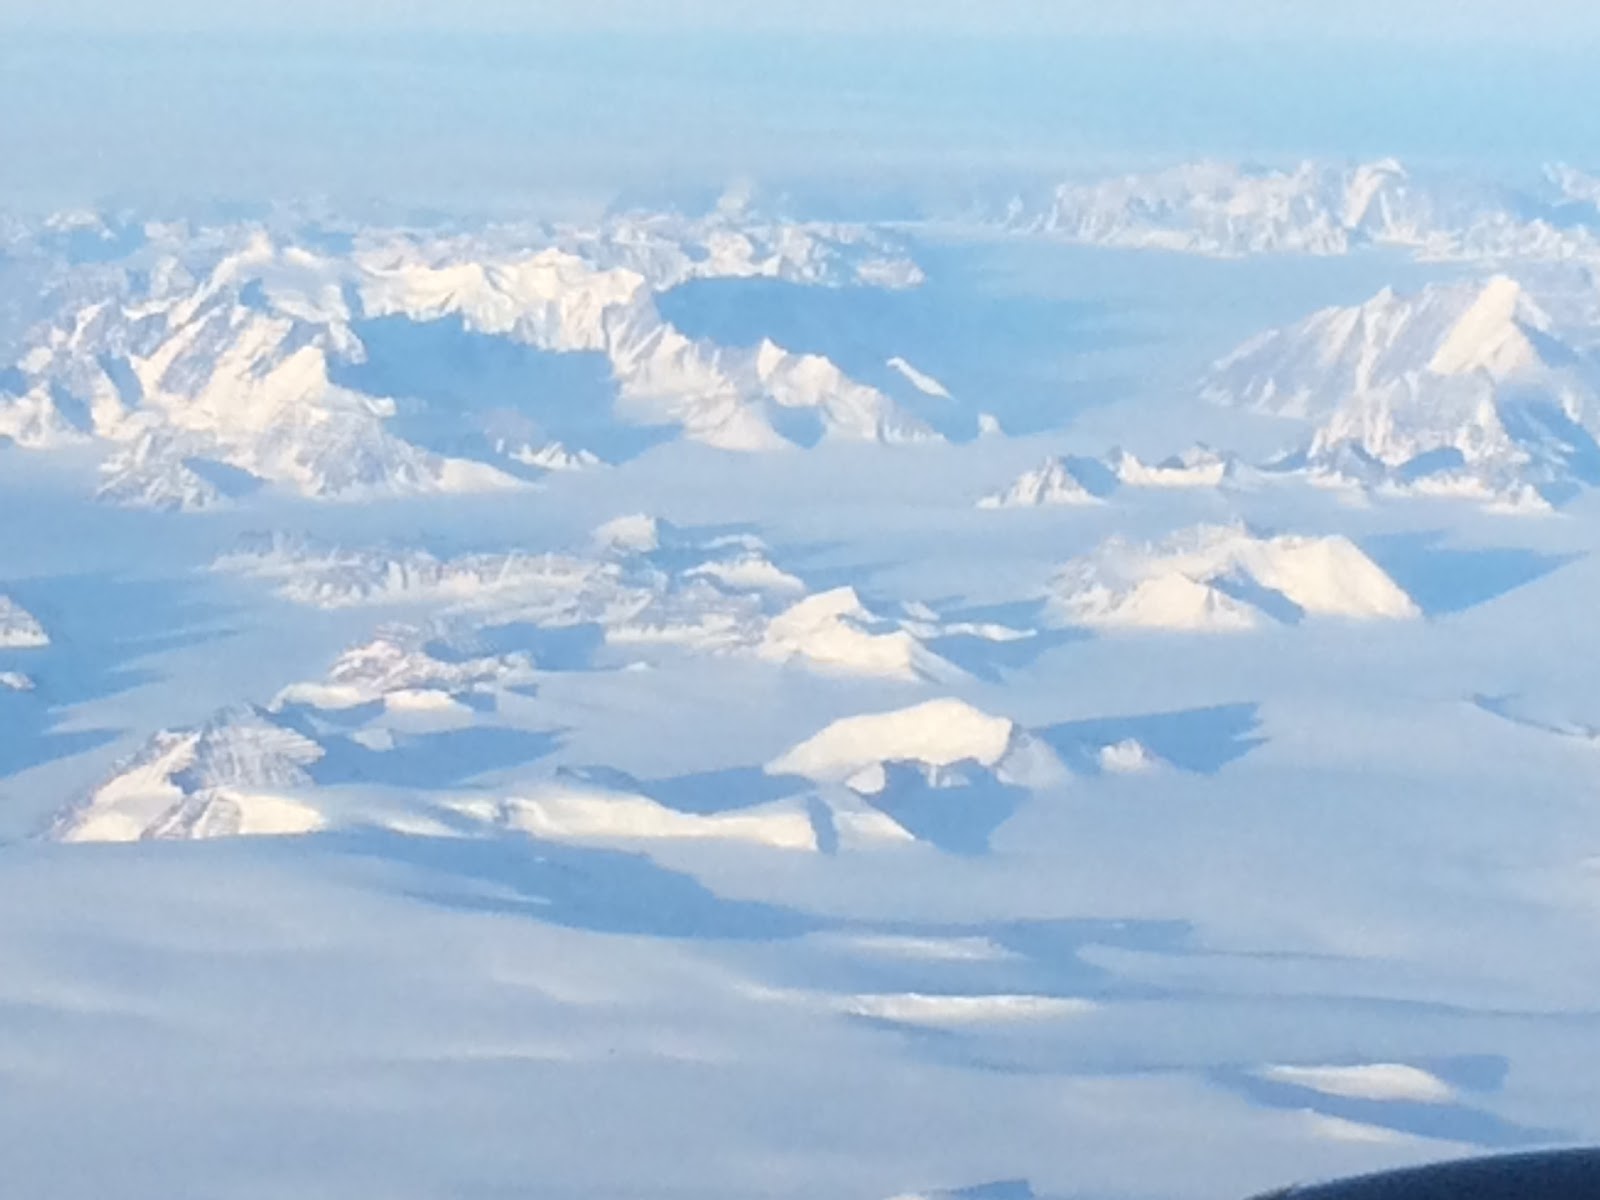 Greenland as seen from our polar-route flight from SFO to Frankfurt.